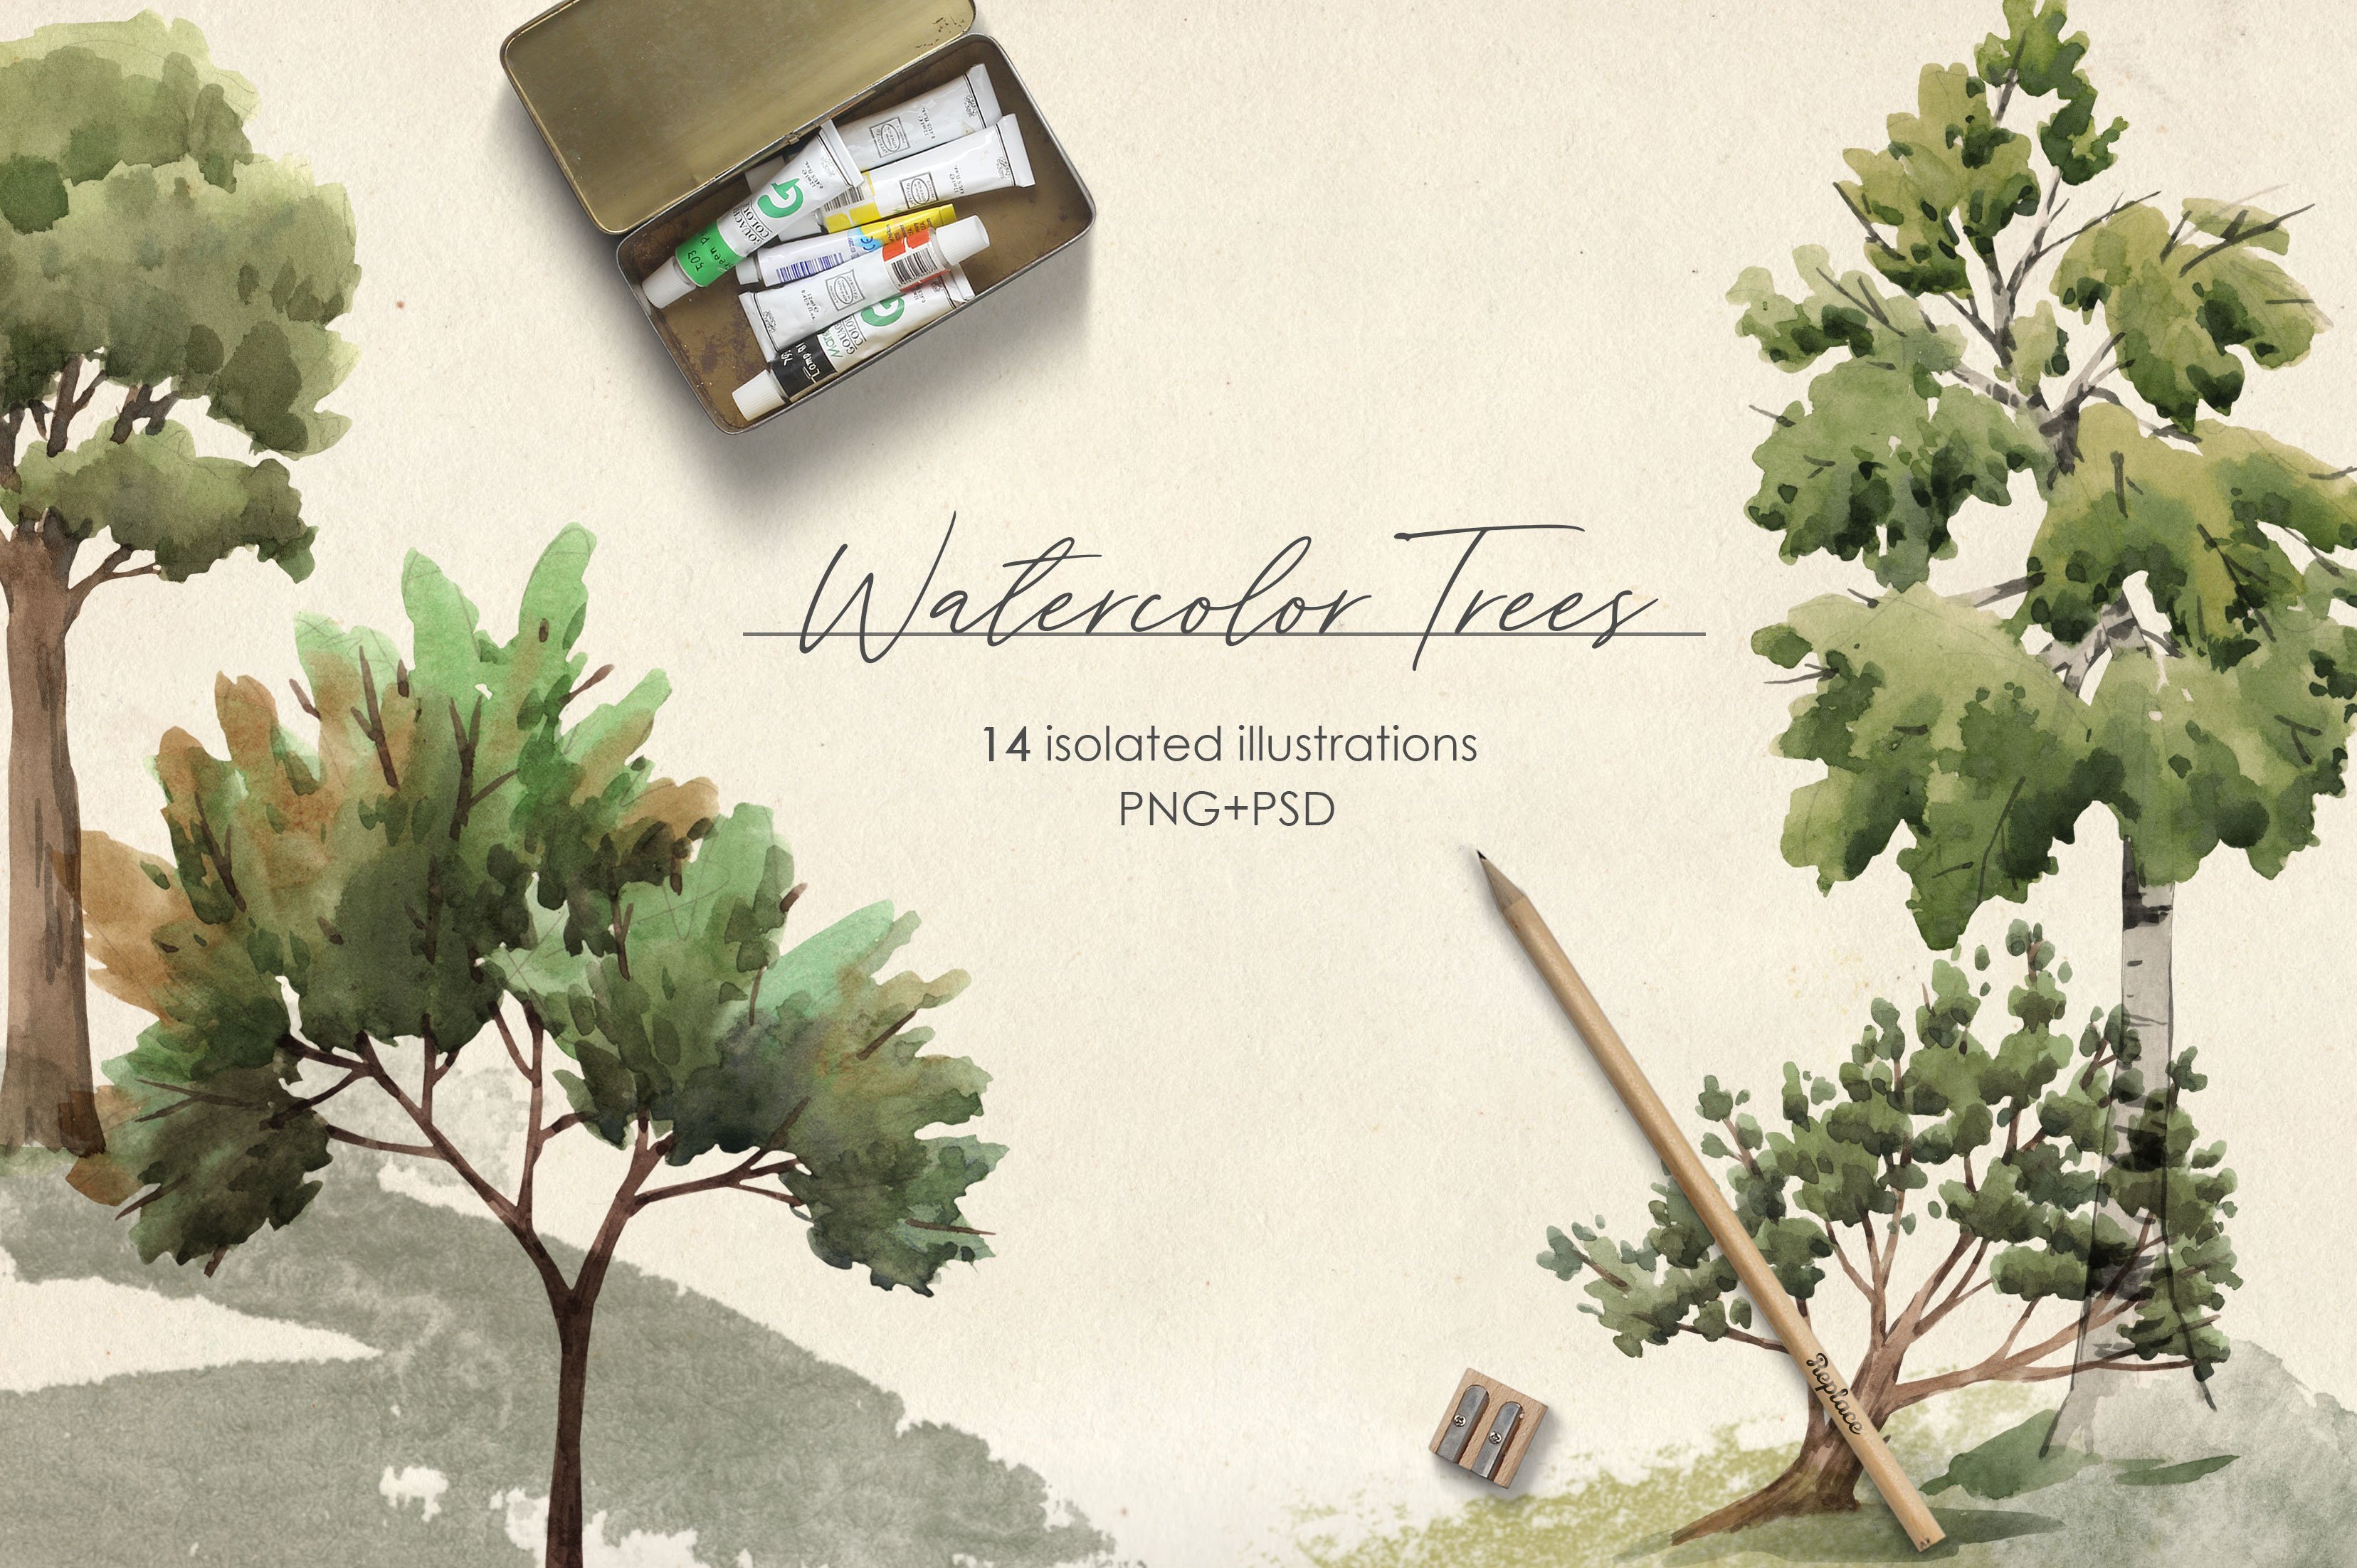 Watercolor Trees Illustrations PNG cover image.